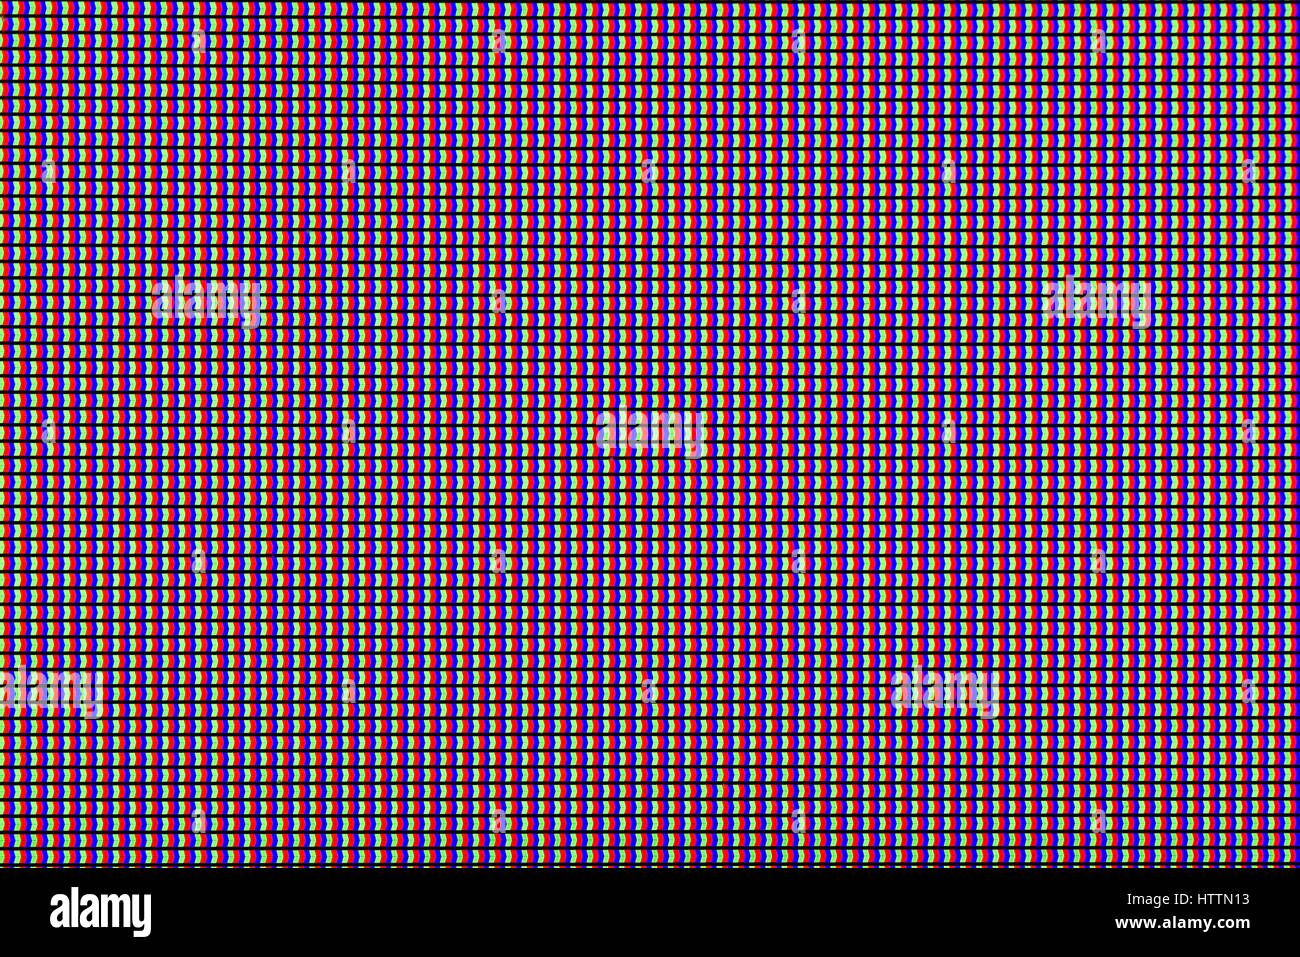 Closeup RGB led diode of led TV or led monitor screen display panel. Colorful led screen background for design with copy space for text or image Stock Photo